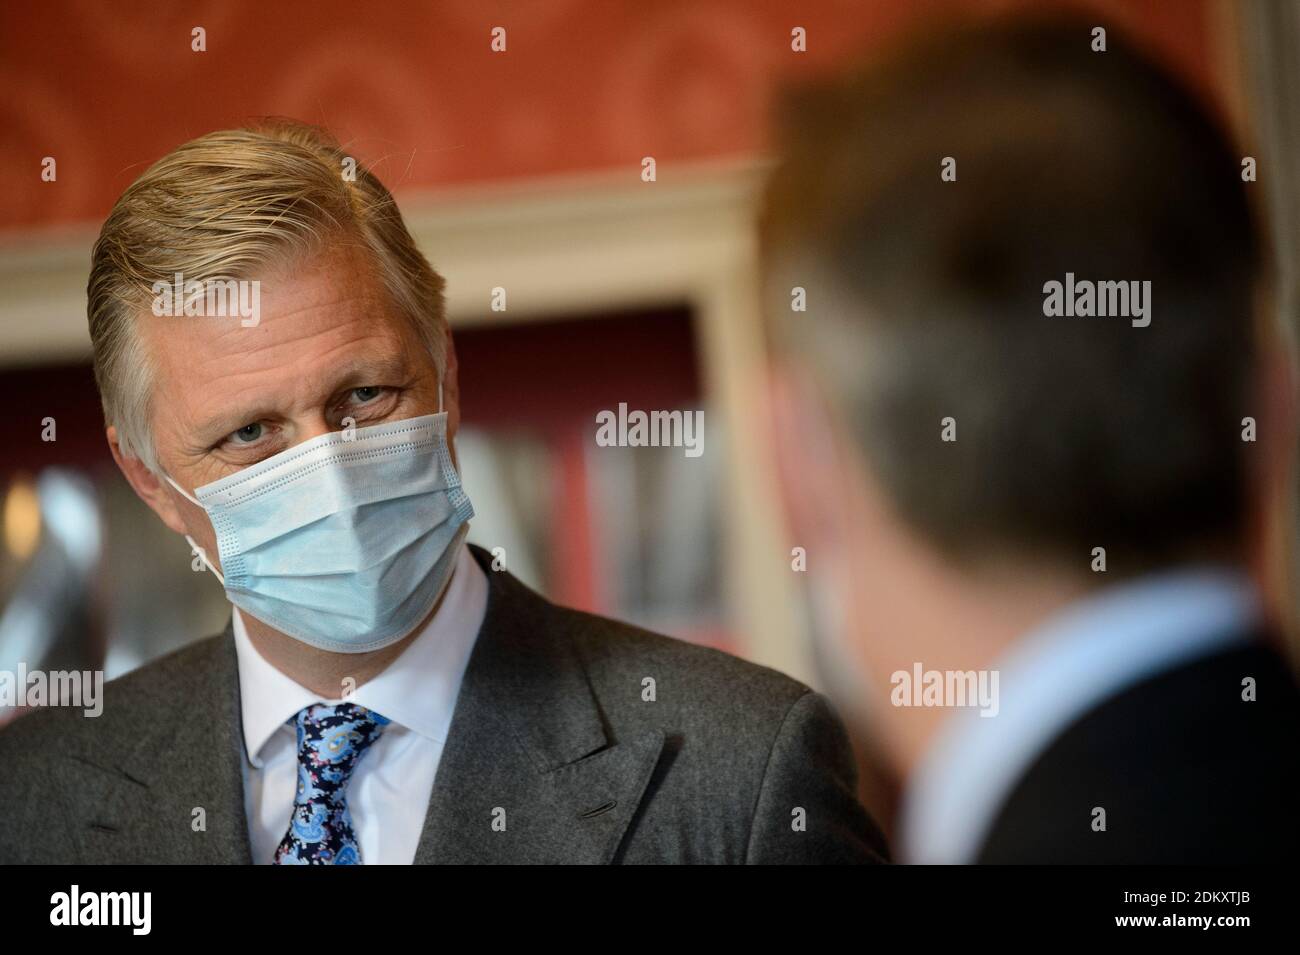 King Philippe - Filip of Belgium pictured at a ceremony to award the 'Francqui-Collen Prize 2020', Wednesday 16 December 2020, in Brussels. The scient Stock Photo